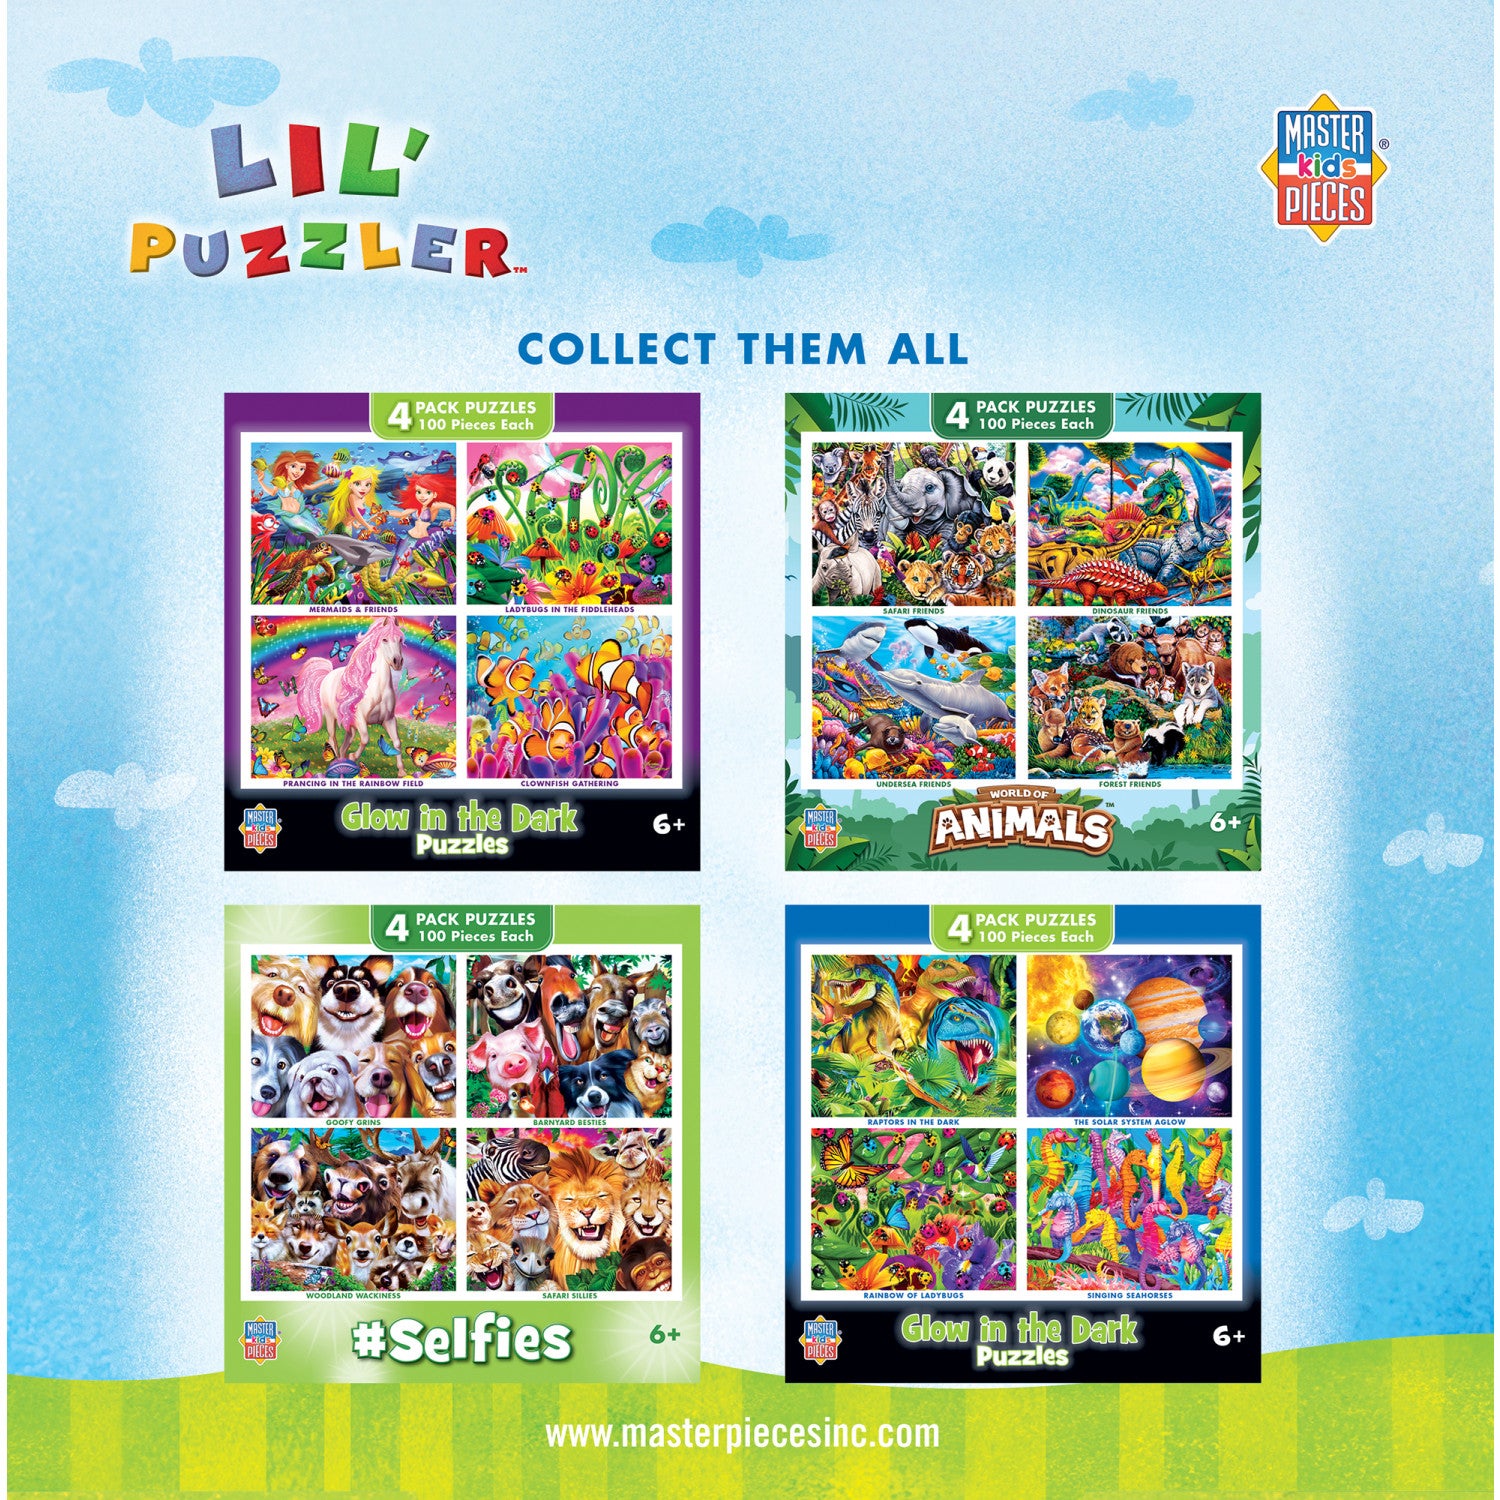 Lil Puzzler 48 Piece Jigsaw Puzzles 4-Pack